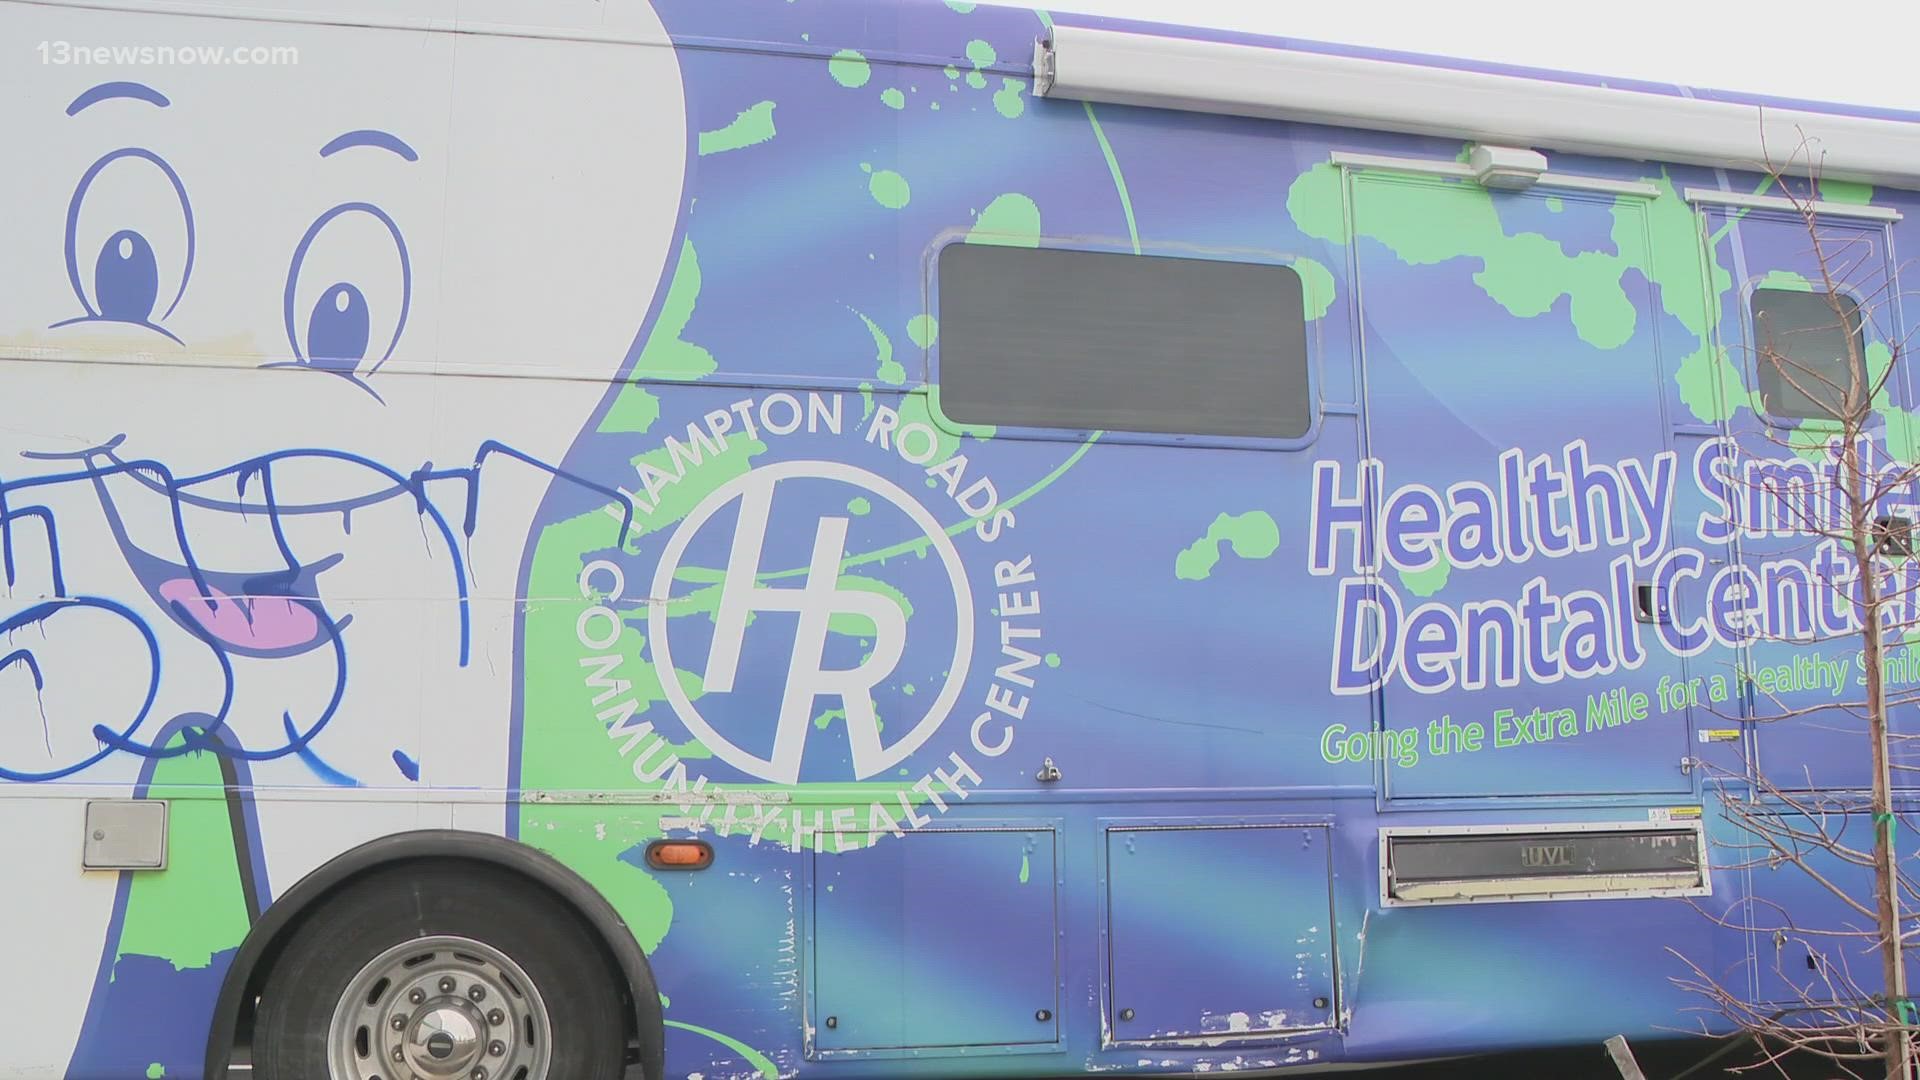 Thousands of federal dollars will help get the van, which provides needed care for kids in several cities, back on the road and with improvements.